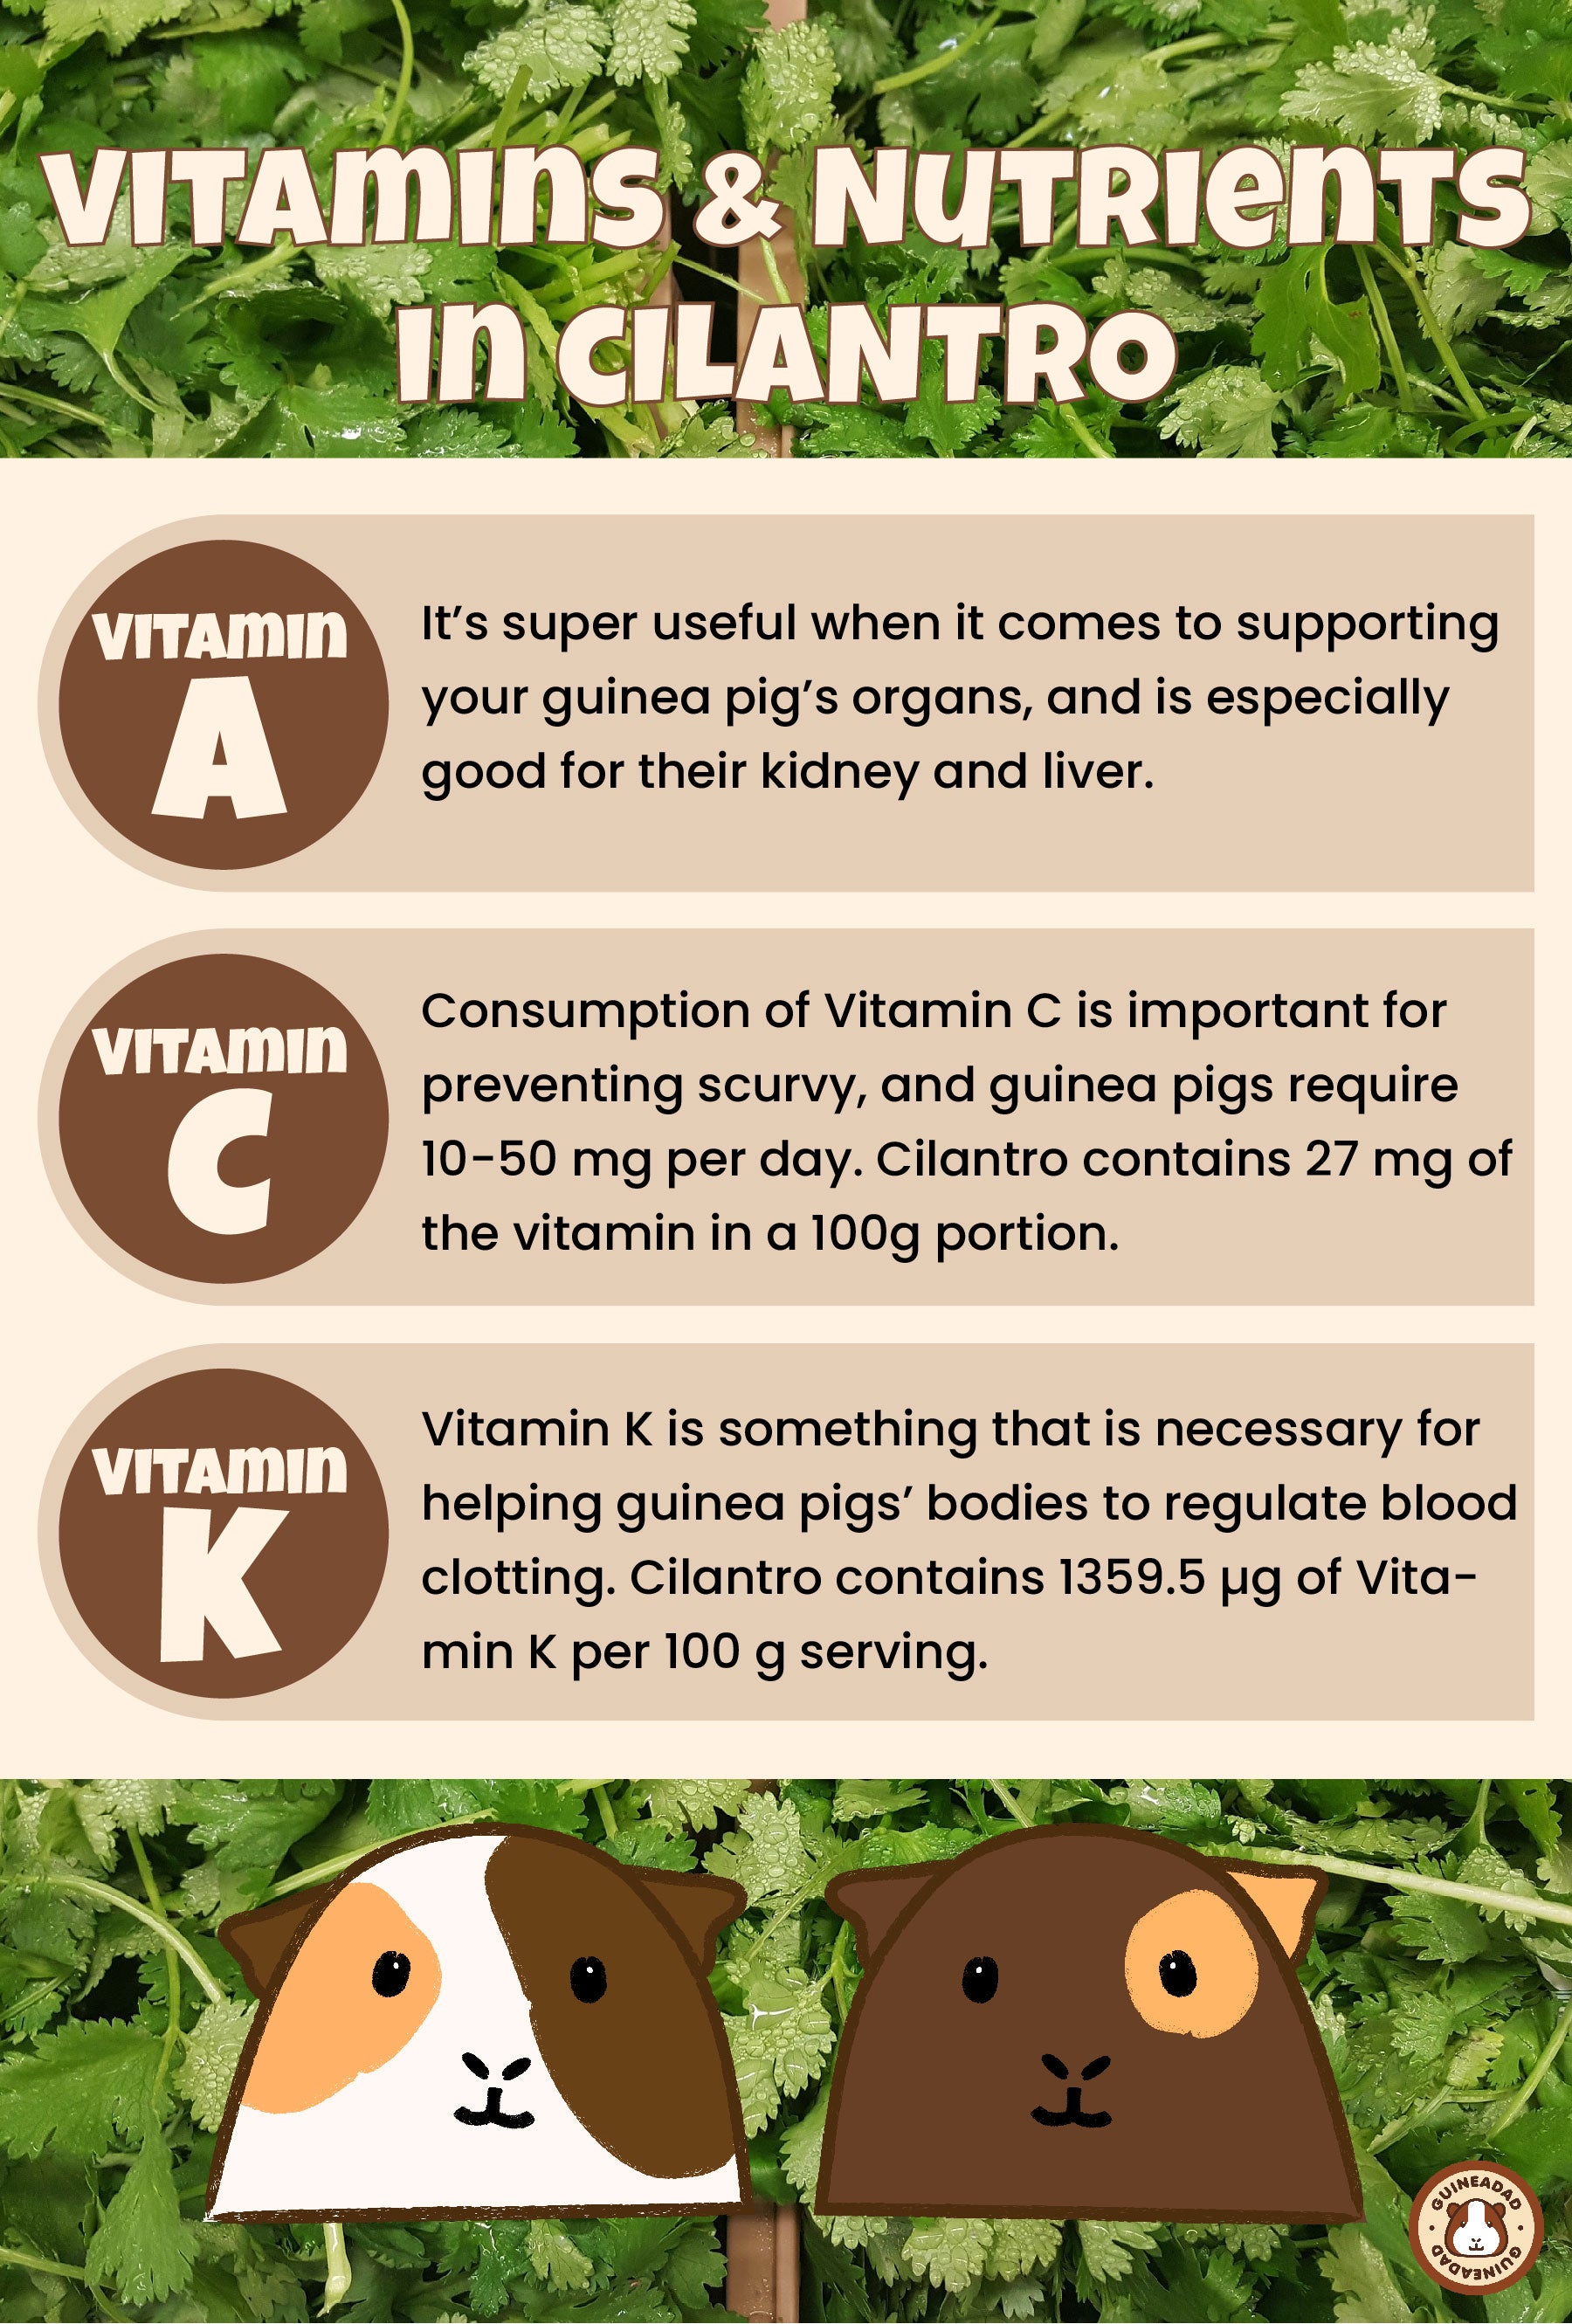 Infographic displaying the vitamins and nutrients in cilantro for guinea pigs